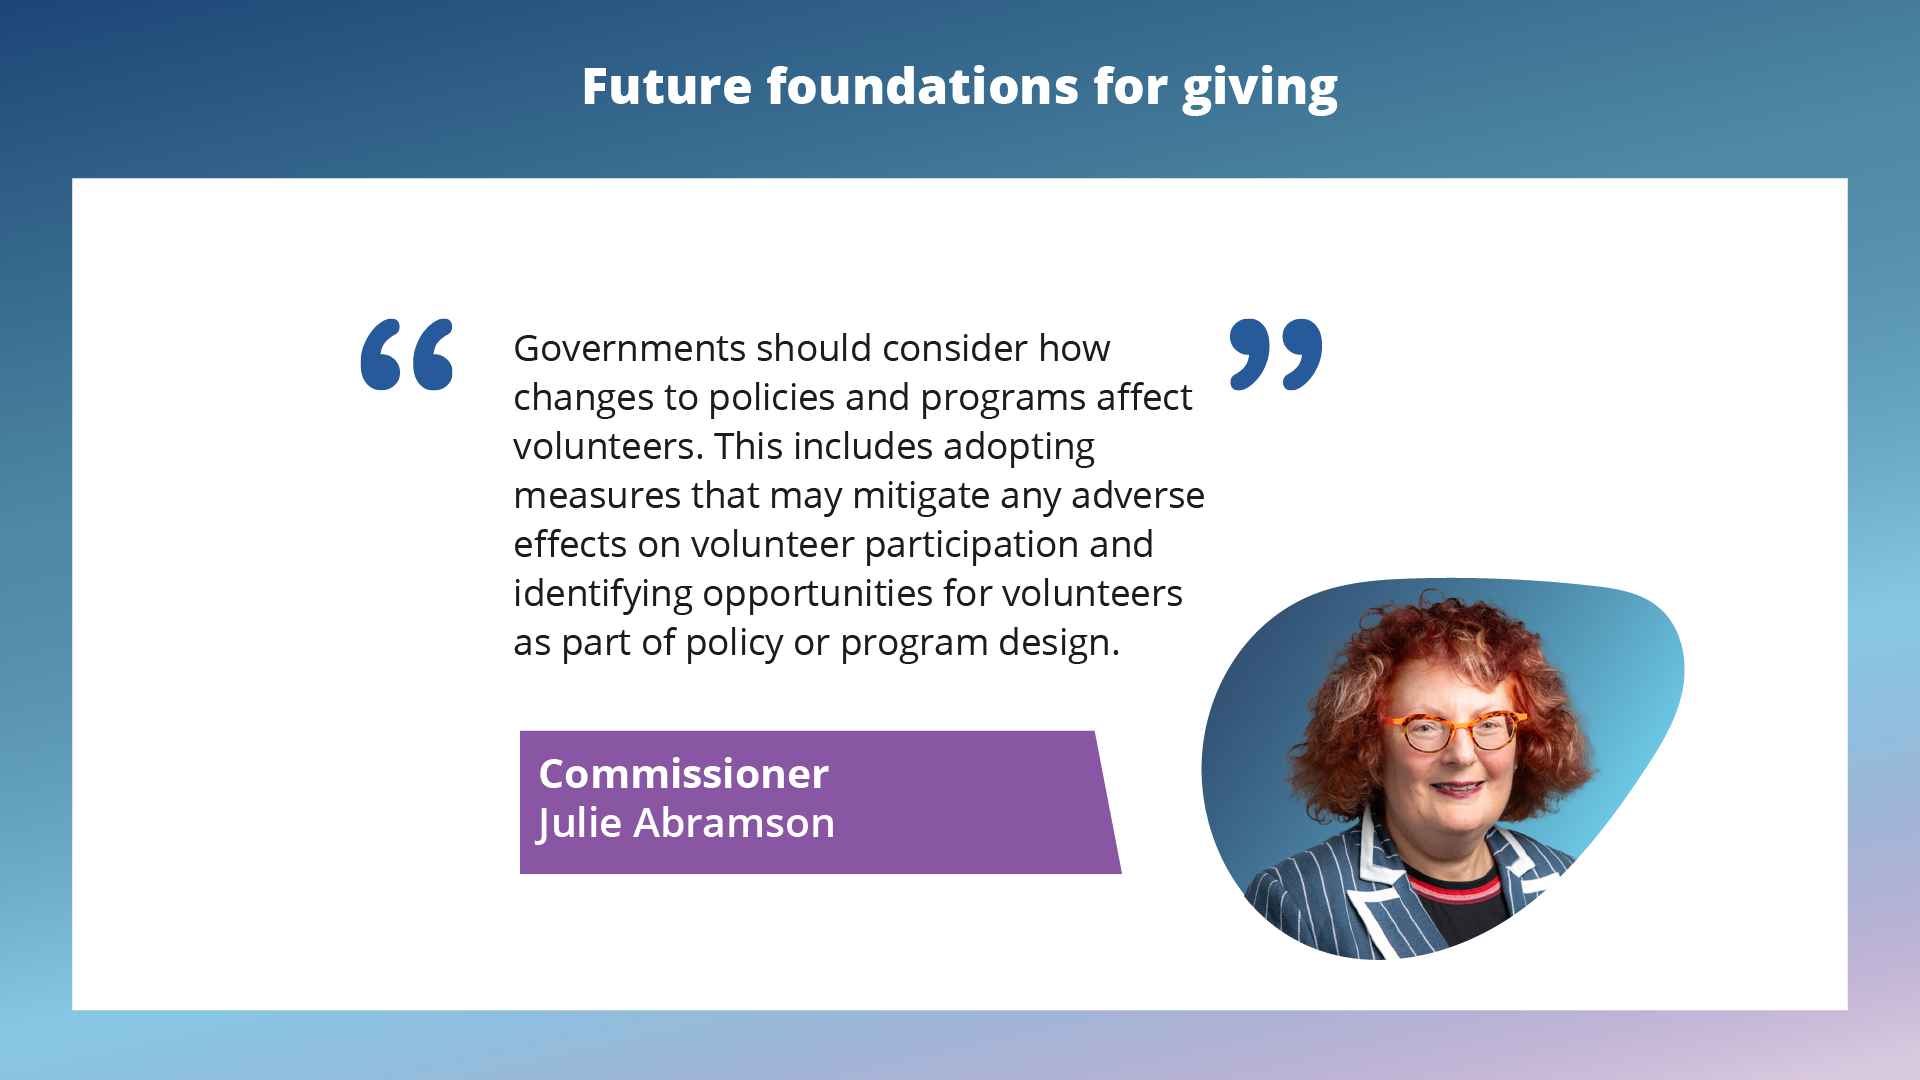 Governments should consider how changes to policies and programs affect volunteers. This includes adopting measures that may mitigate any adverse effects on volunteer participation and identifying opportunities for volunteers as part of policy or program design. Commissioner Julie Abramson.